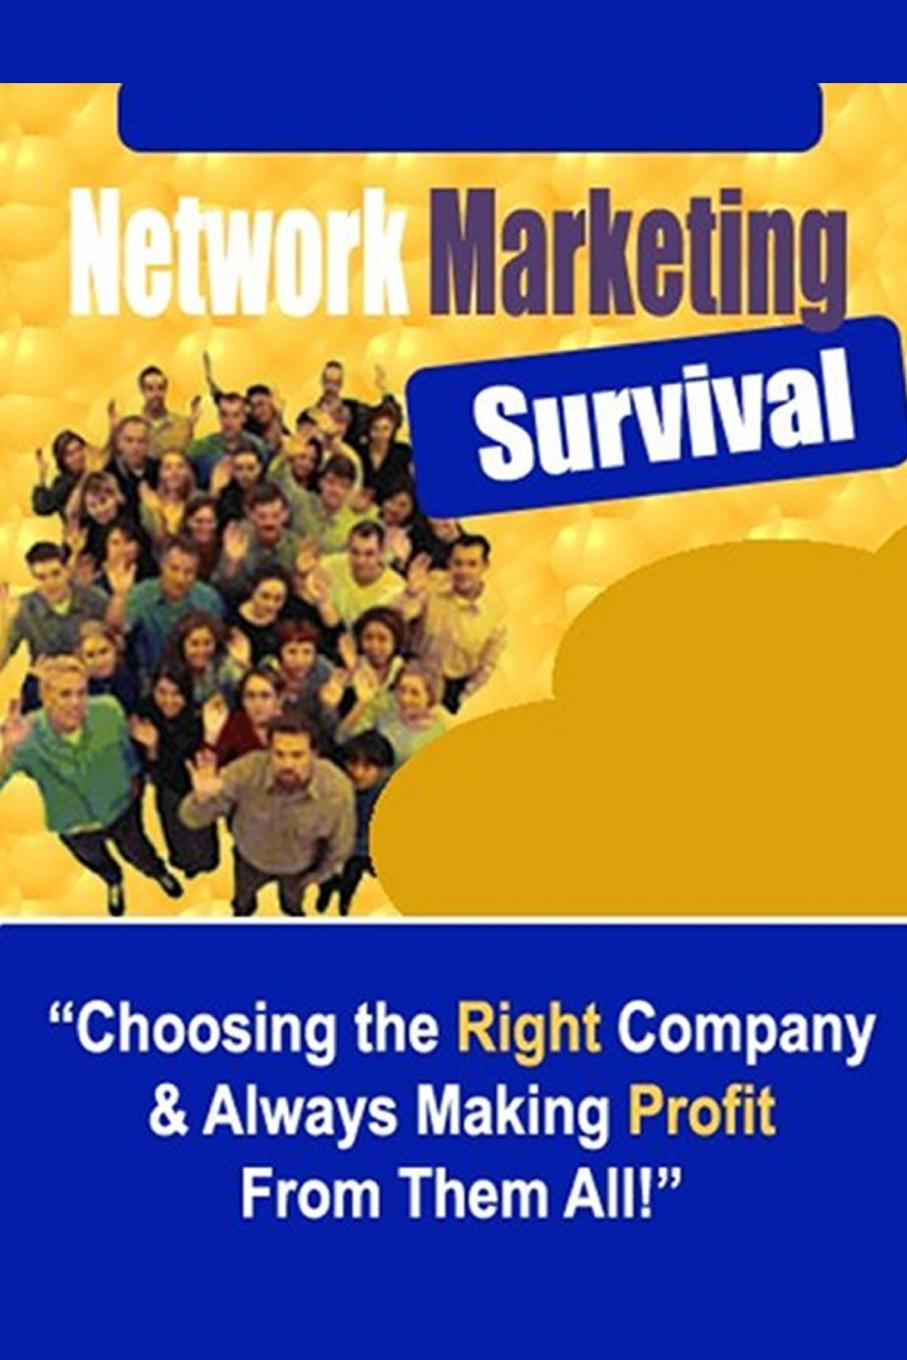 Network Marketing Survival - Choosing the Right Company . Always Making Profit from Them All.